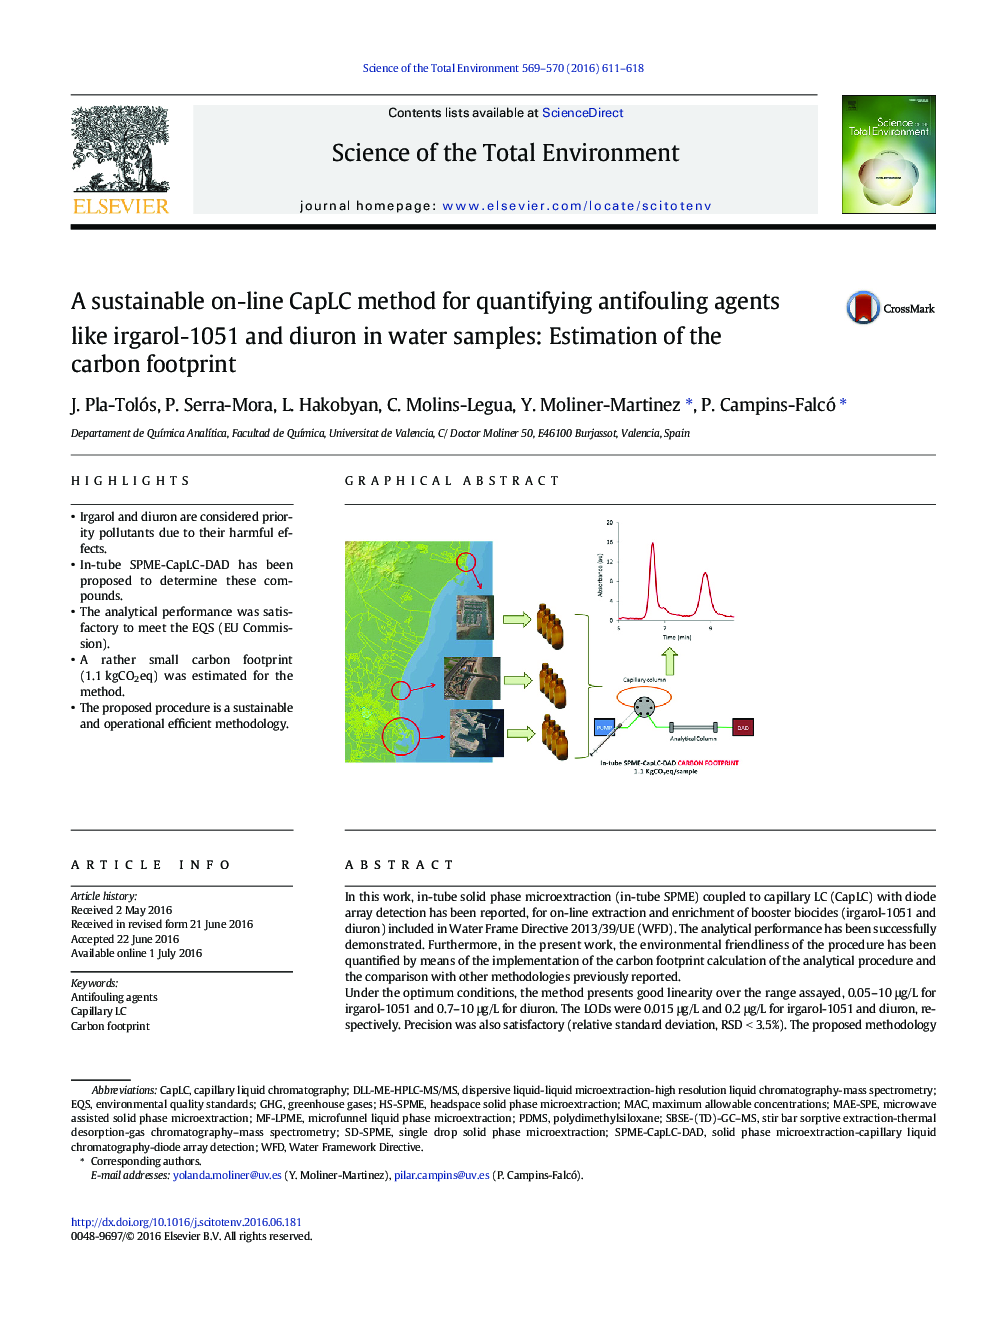 A sustainable on-line CapLC method for quantifying antifouling agents like irgarol-1051 and diuron in water samples: Estimation of the carbon footprint